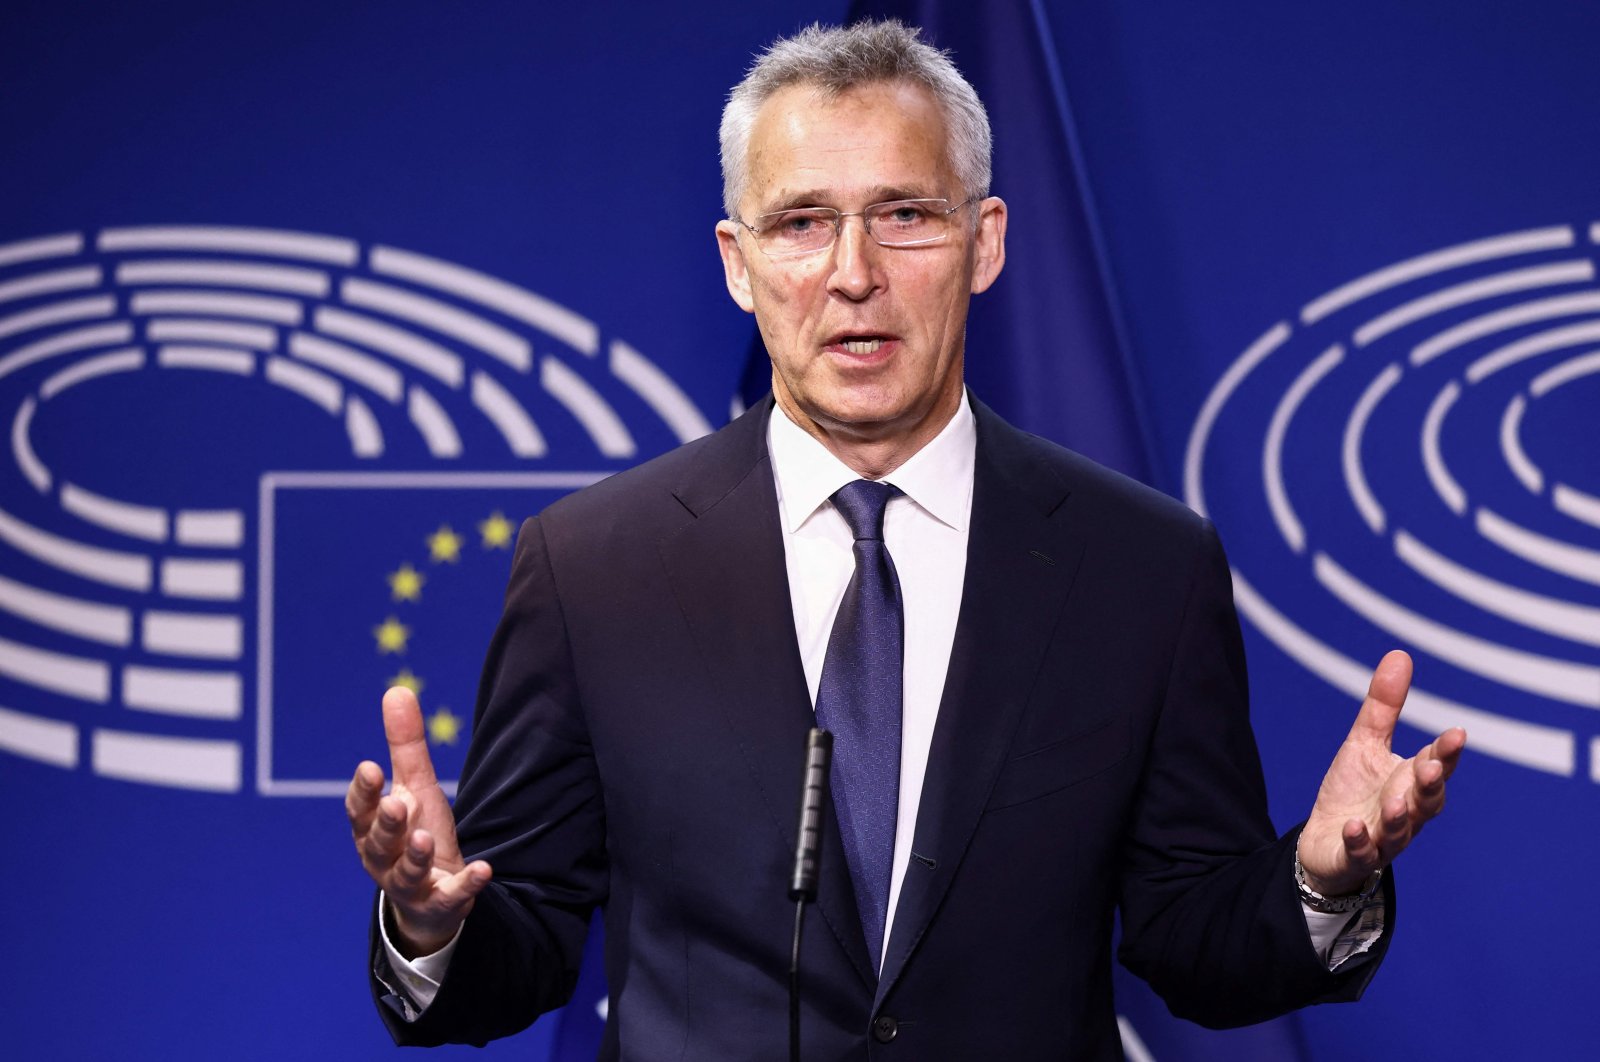 NATO Secretary General Jens Stoltenberg holds a press conference along with the European Parliament president at the European Parliament in Brussels, April 28, 2022. (AFP Photo)